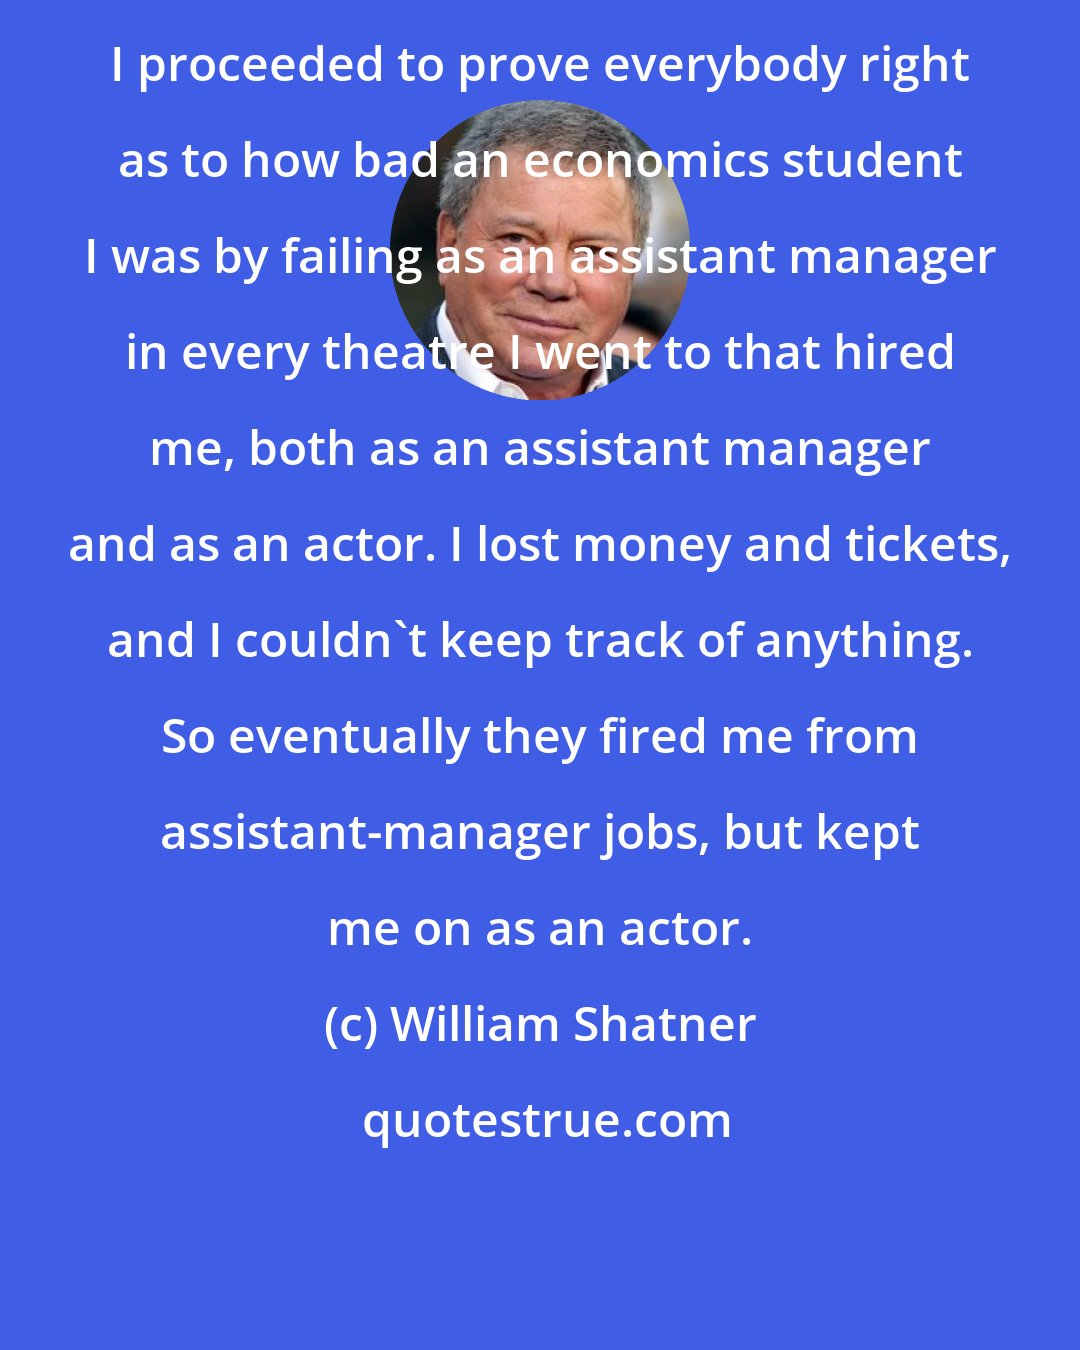 William Shatner: I proceeded to prove everybody right as to how bad an economics student I was by failing as an assistant manager in every theatre I went to that hired me, both as an assistant manager and as an actor. I lost money and tickets, and I couldn't keep track of anything. So eventually they fired me from assistant-manager jobs, but kept me on as an actor.